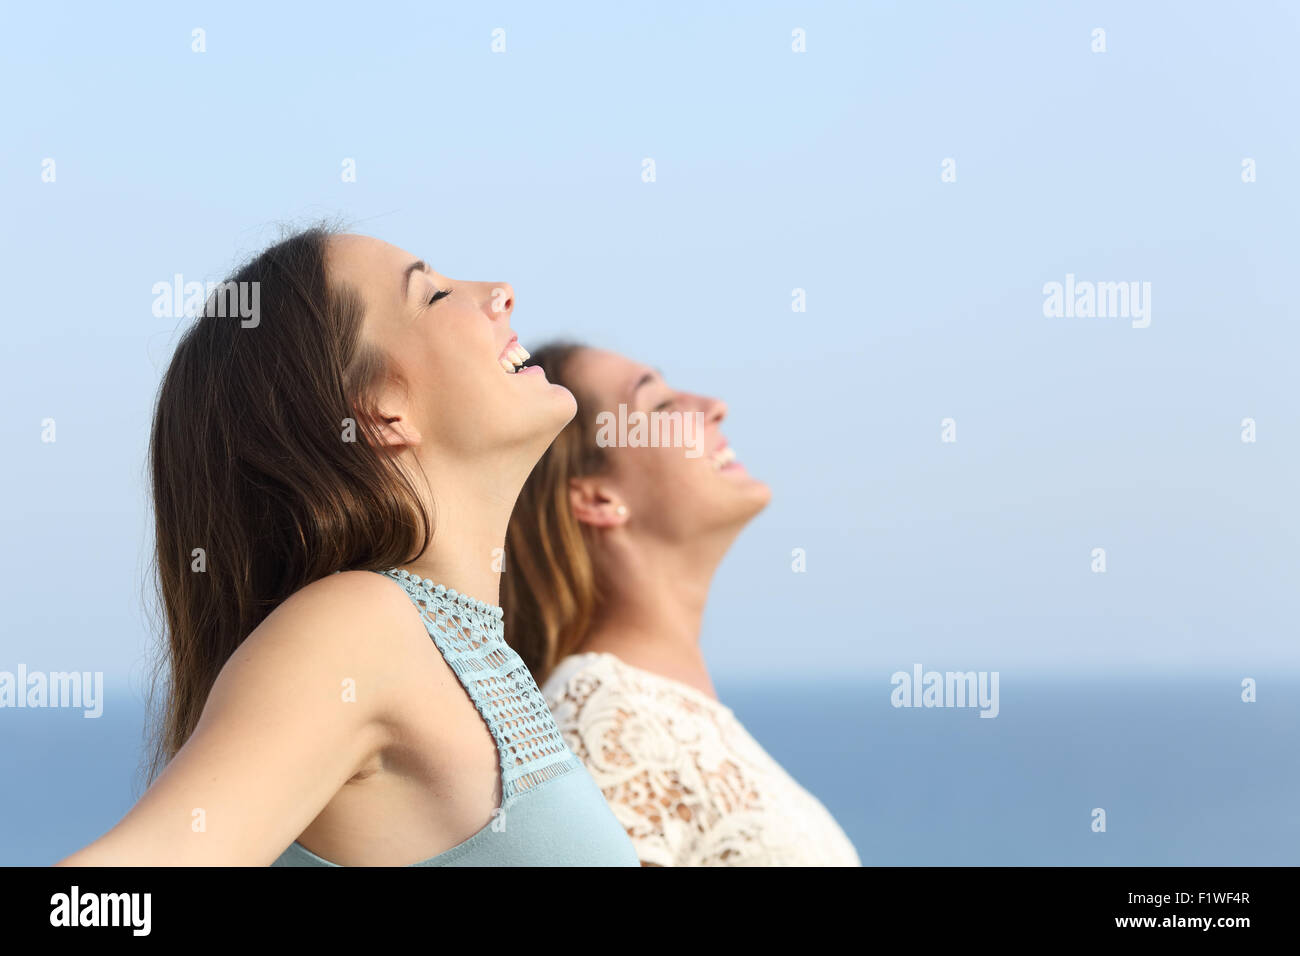 Two girls doing breath exercises inhaling fresh air on the beach Stock Photo